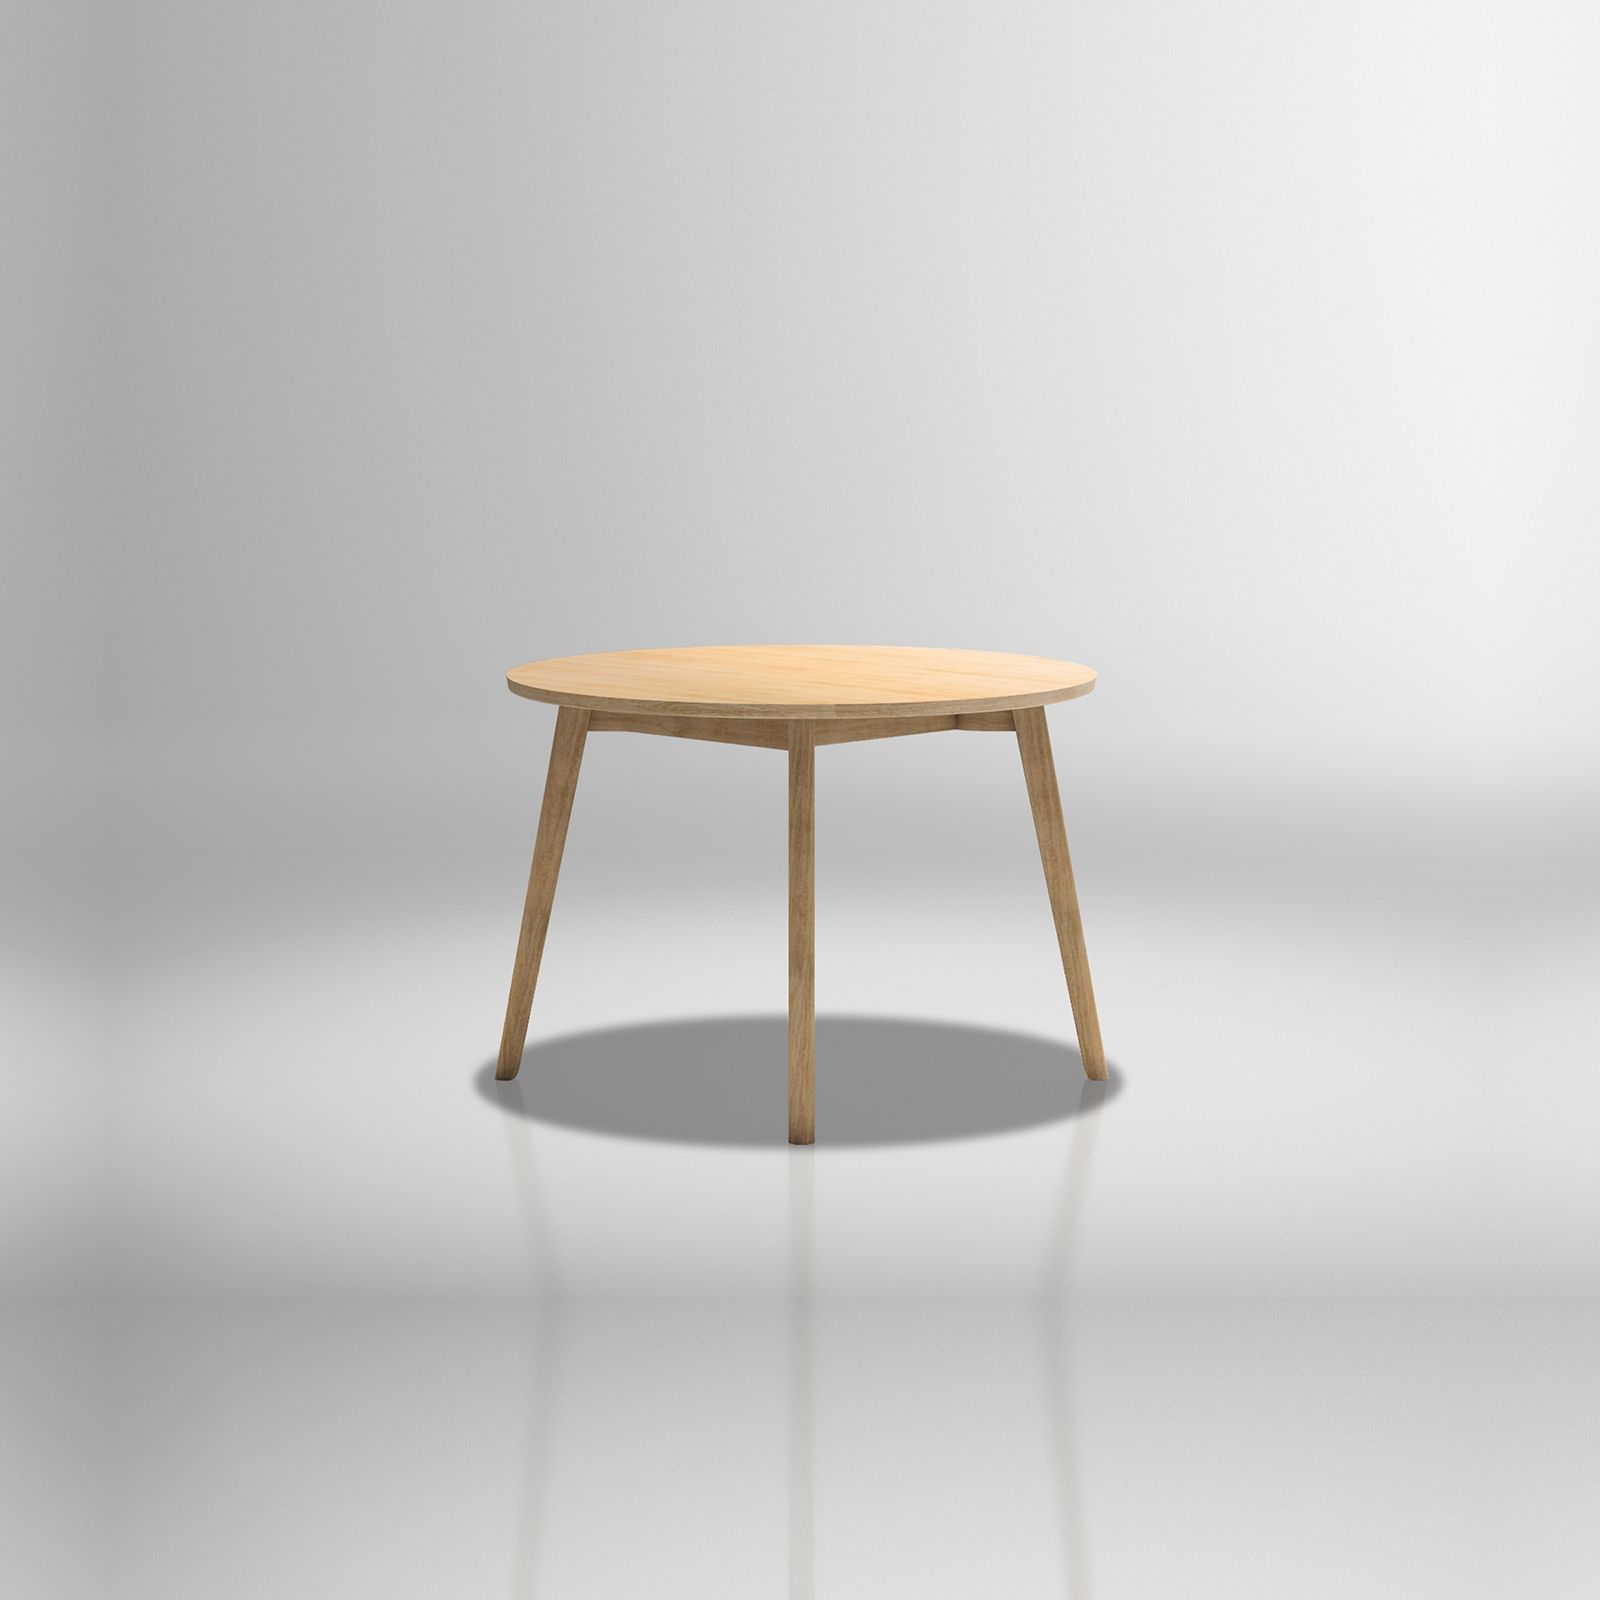 SOLEM TABLE